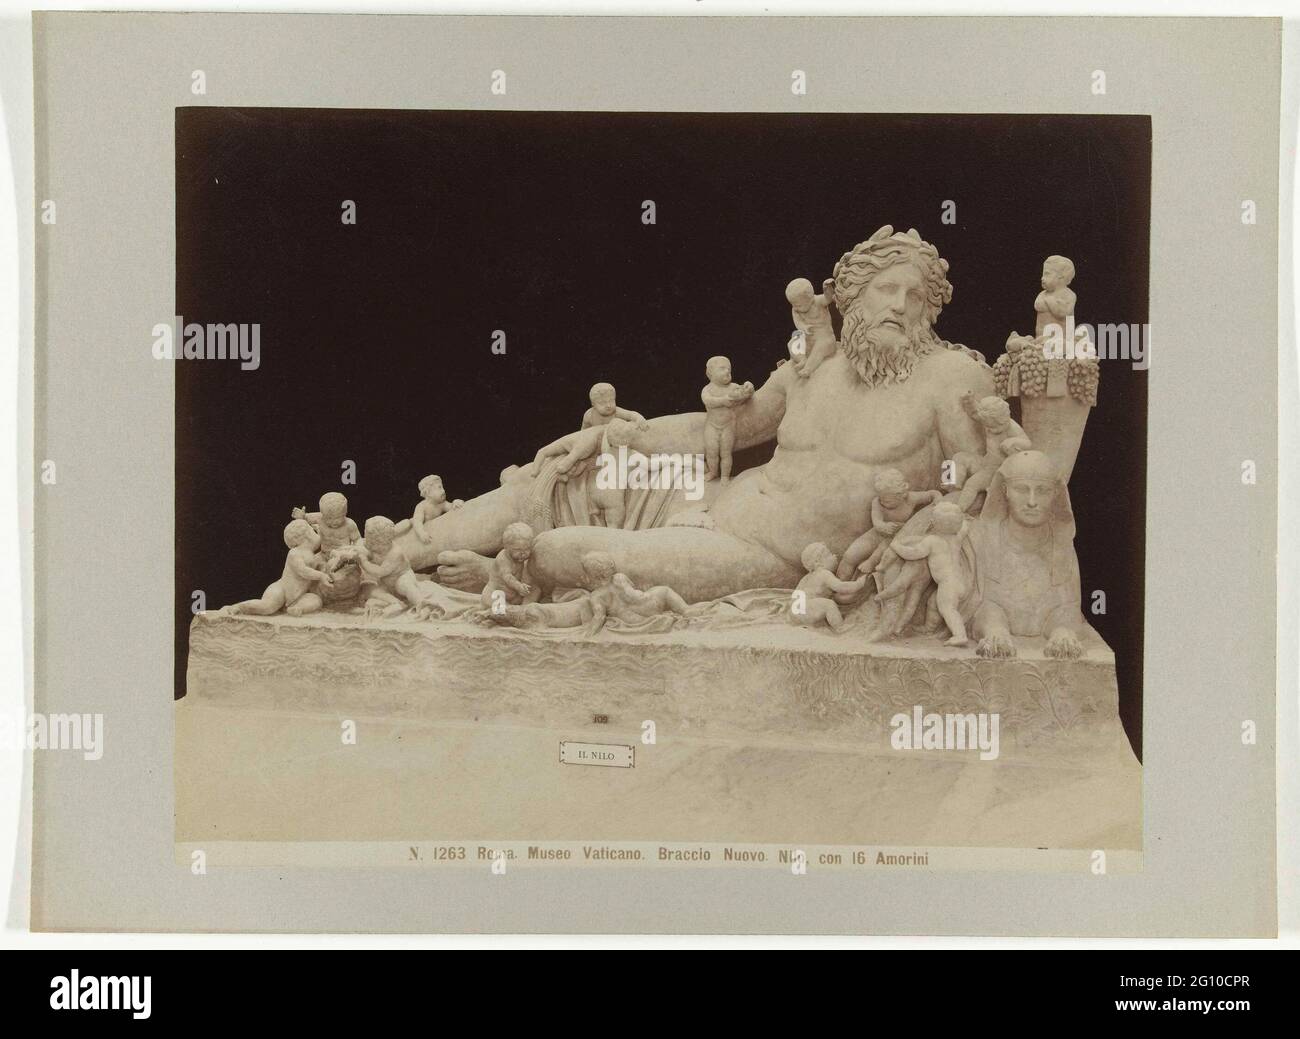 Sculpture of the Nile; N. 1263 Roma. Museo Vaticano. Braccio Nuovo. Nilo, Con 16 Amorini. Nile personification in the form of a horizontal man surrounded by sixteen amorets. Stock Photo